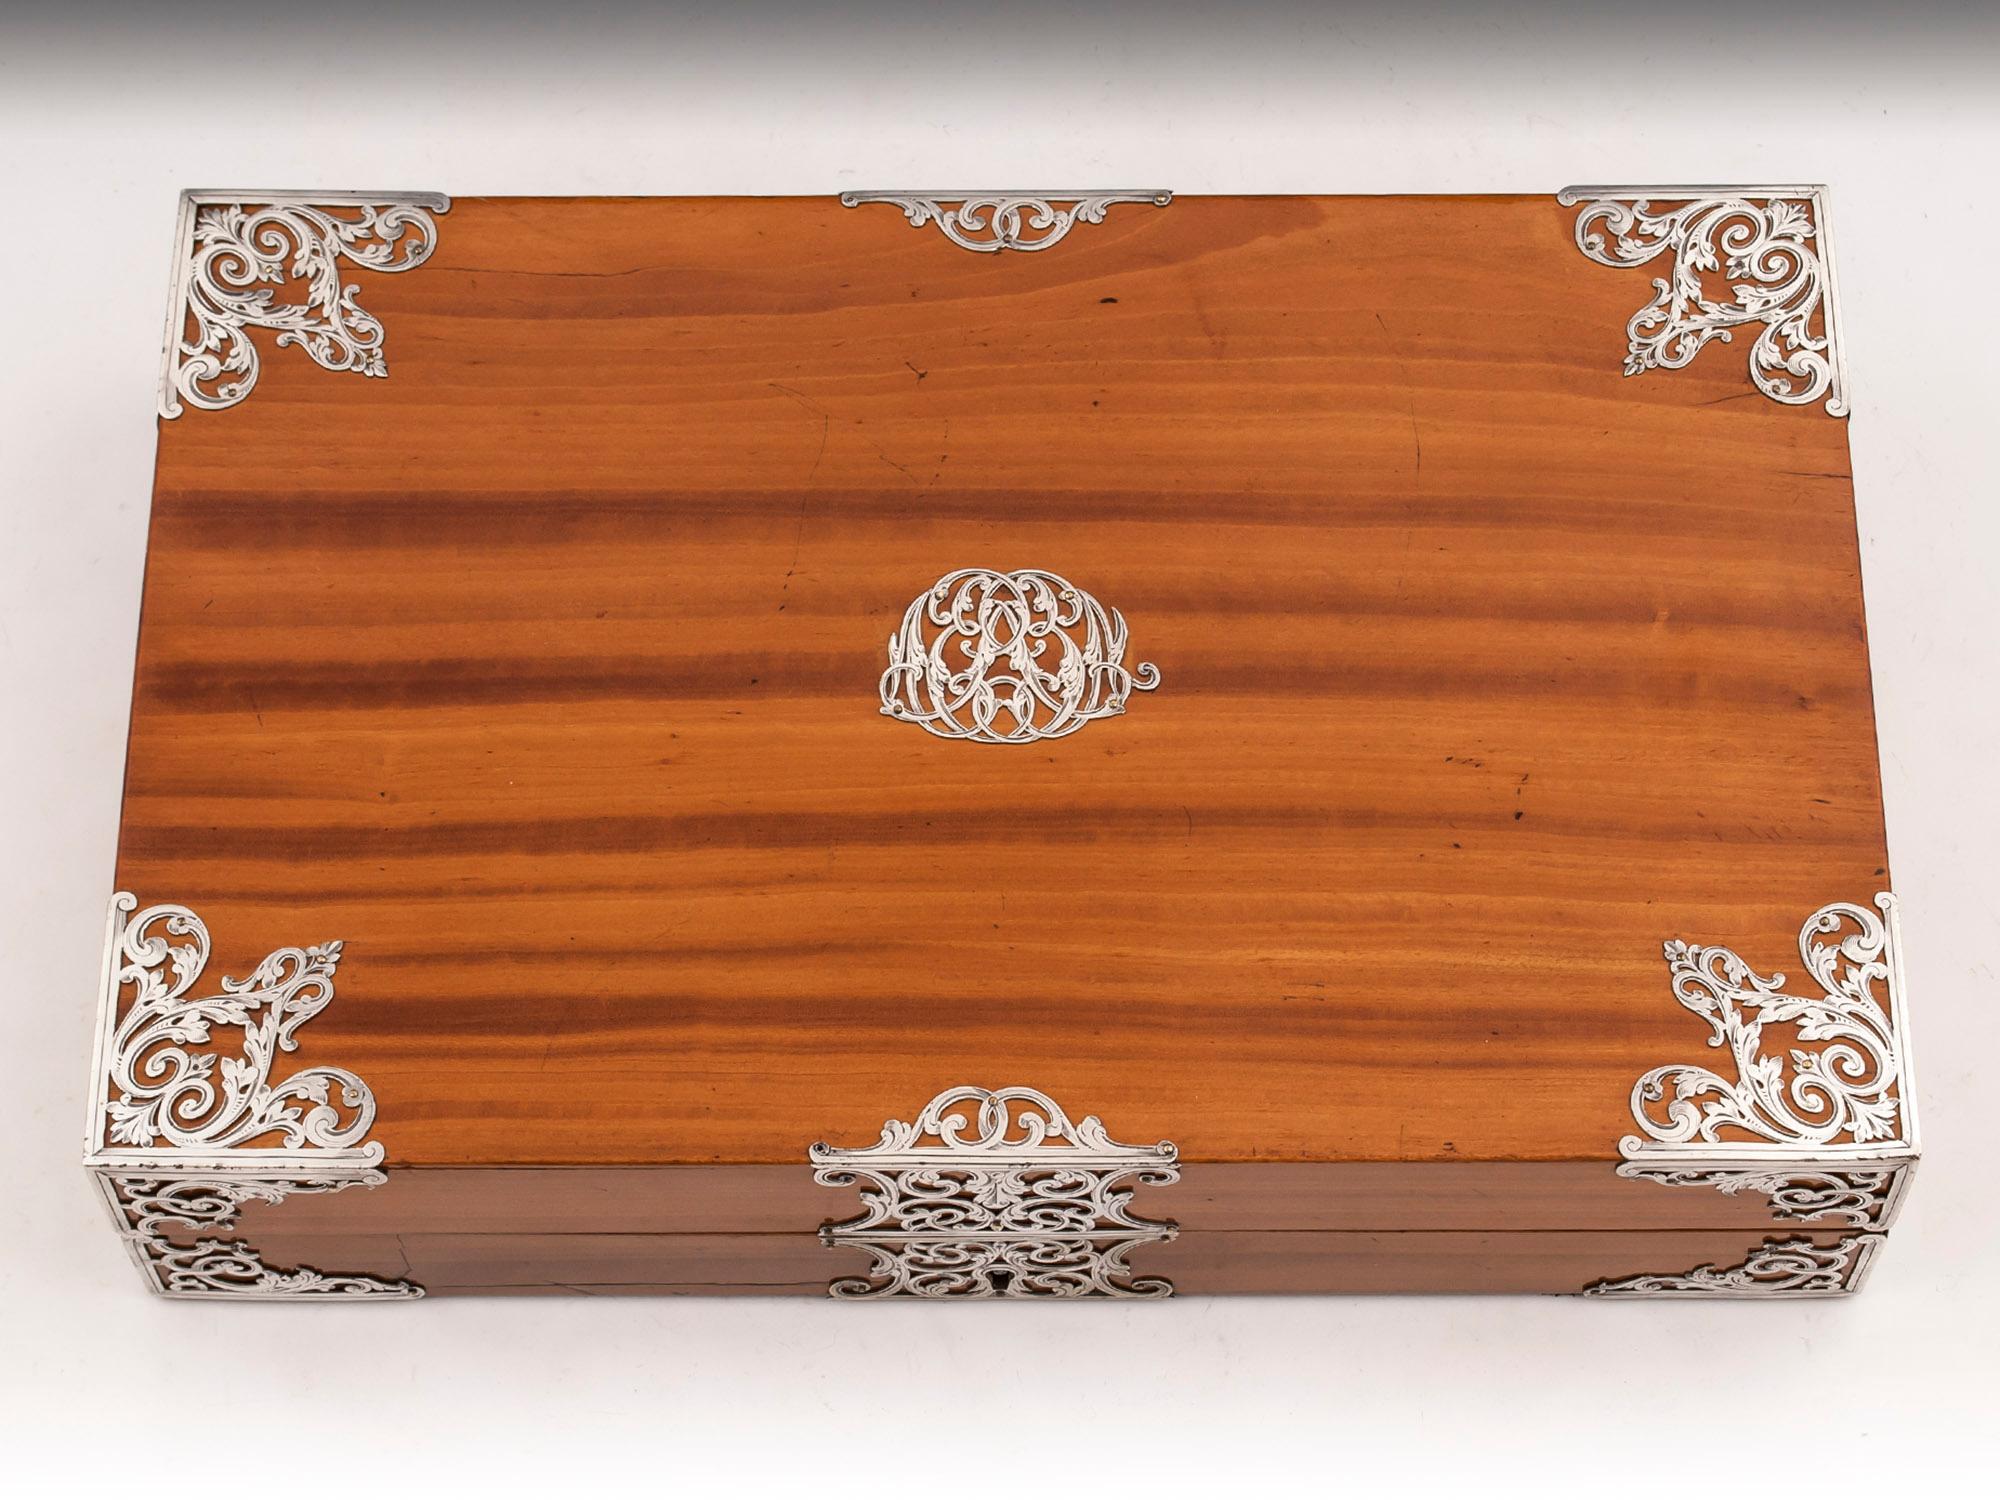 silver engraved jewelry box